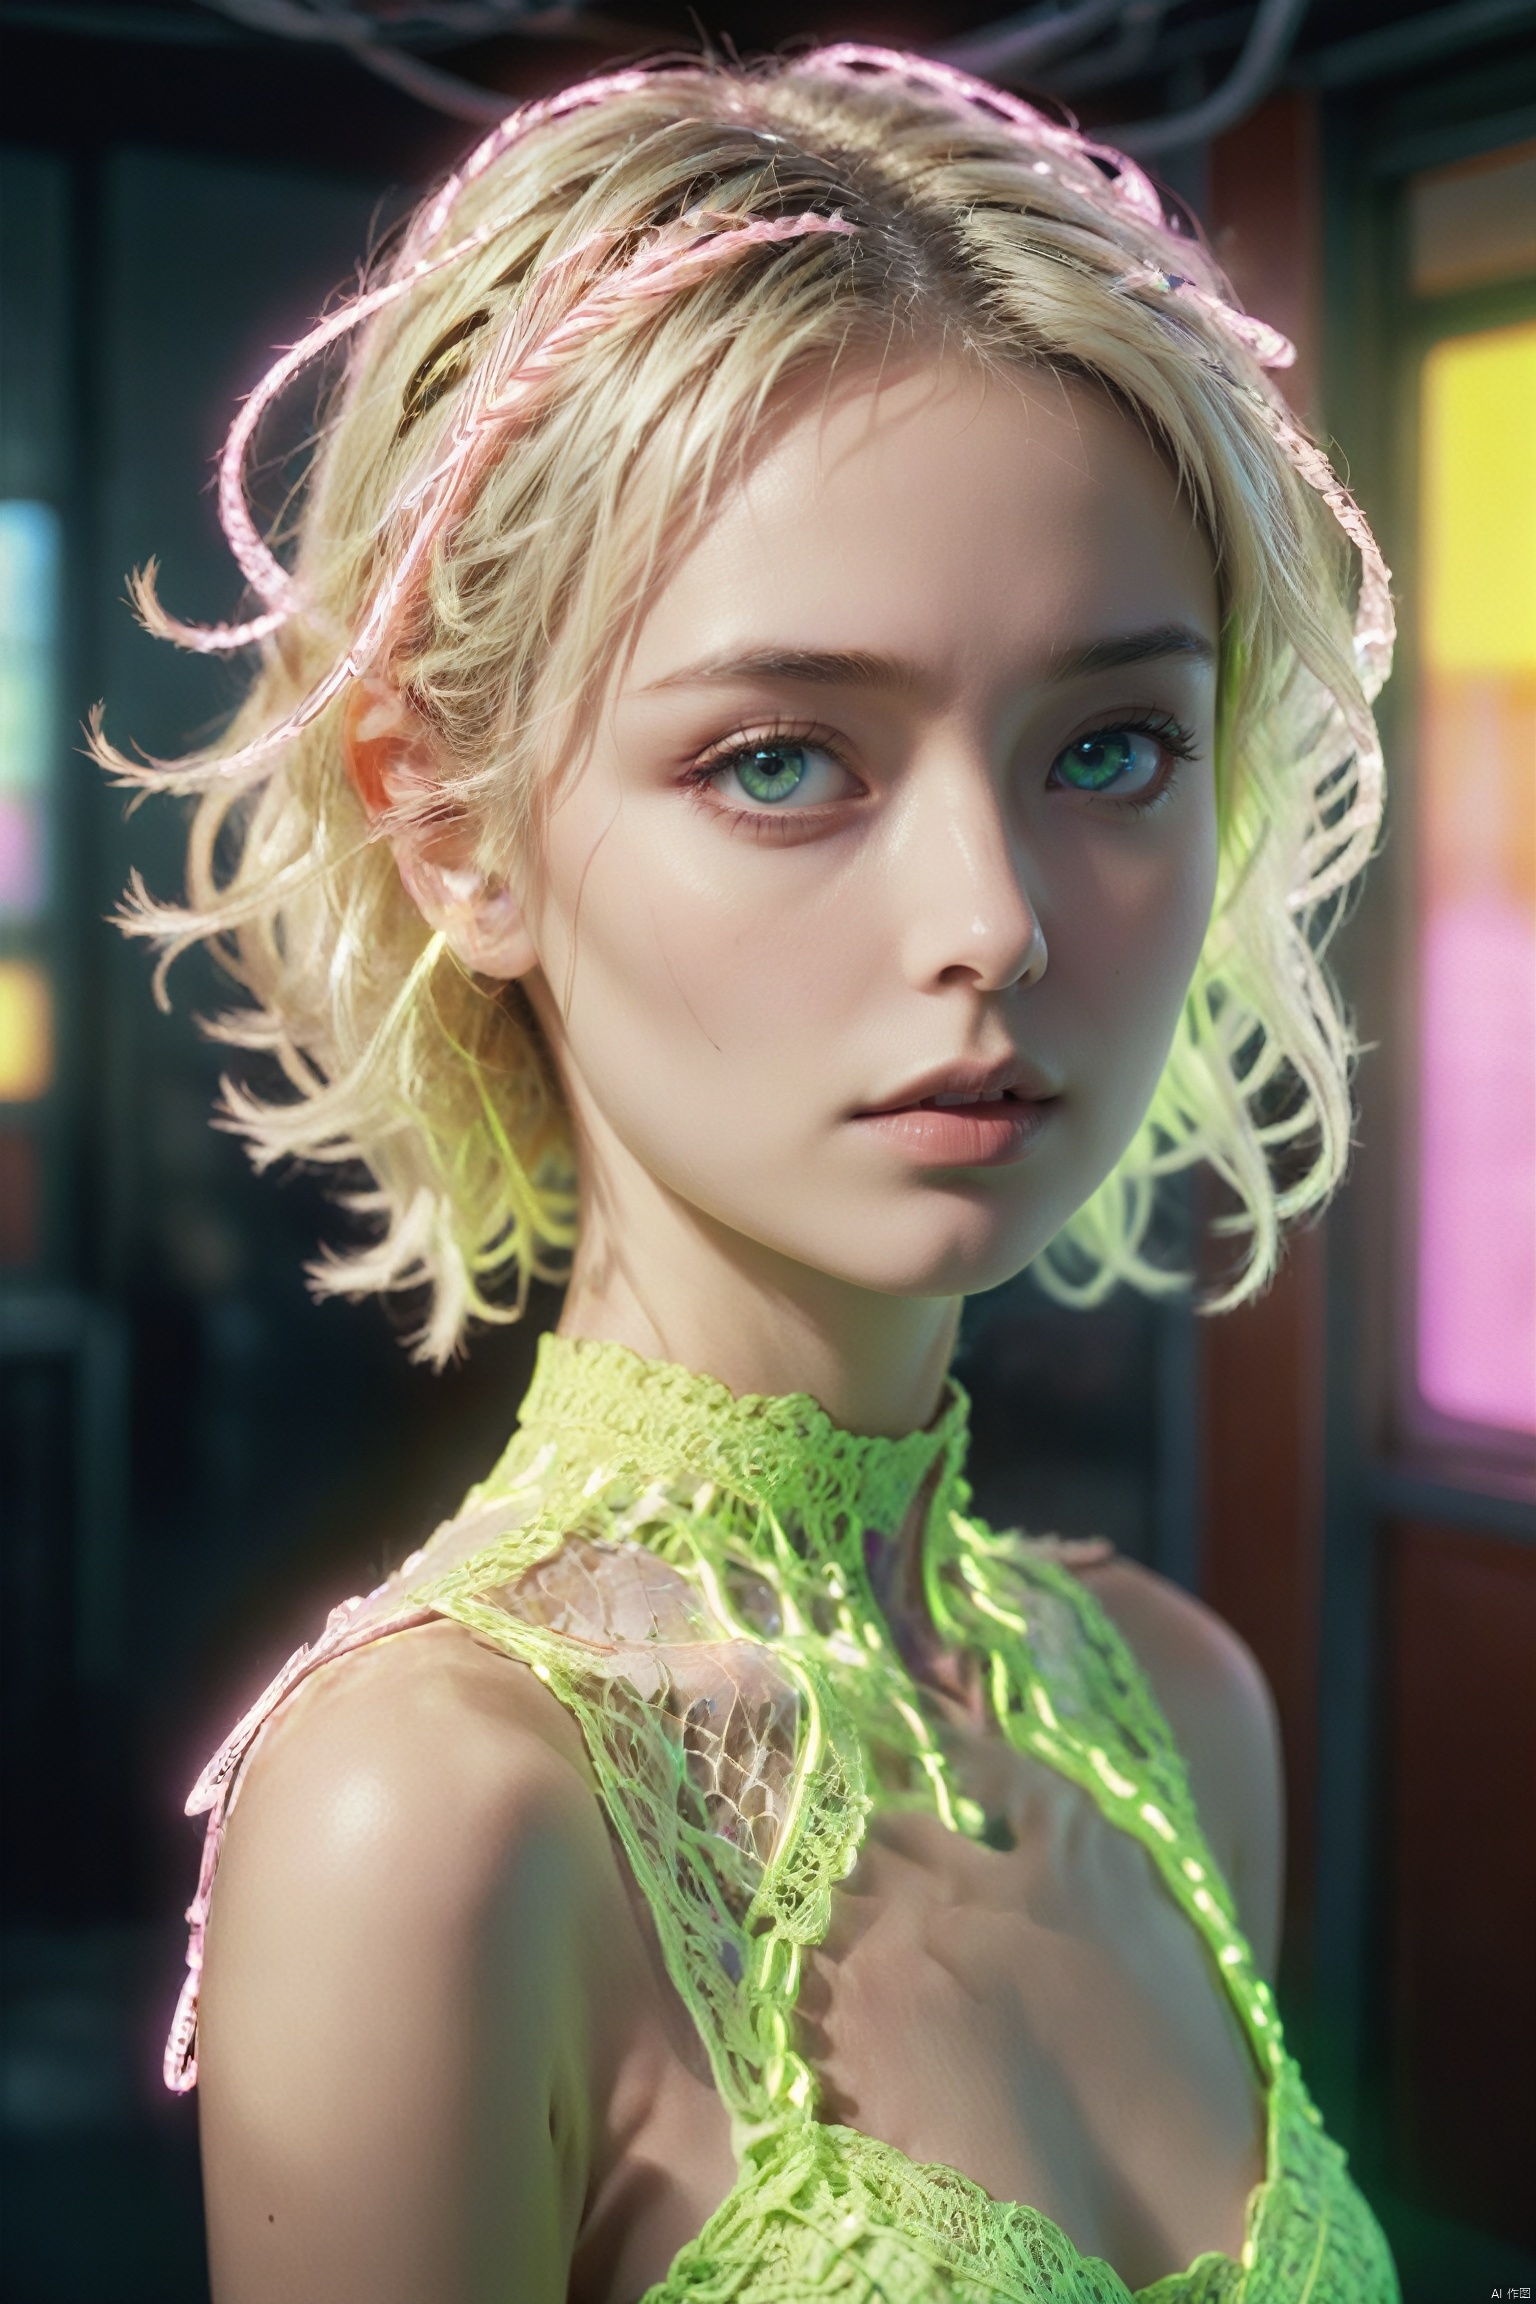 neon-death-cult woman,wearing (neon-colored-lace made from neon wires:1.4), arrogant look, small round face with  pronounced_cheekbones, small_chin,   blonde spiral_twist,  highly detailed , strong contrast, intricate details, volumetric light, 16k HDRI,  lot of details, high quality,  dramatic atmosphere, atmospheric perspective, subsurface scattering, transparency,  analog style, film photography, sharp focus, soft focus, cinematic psychedelic lighting, heavy shadow